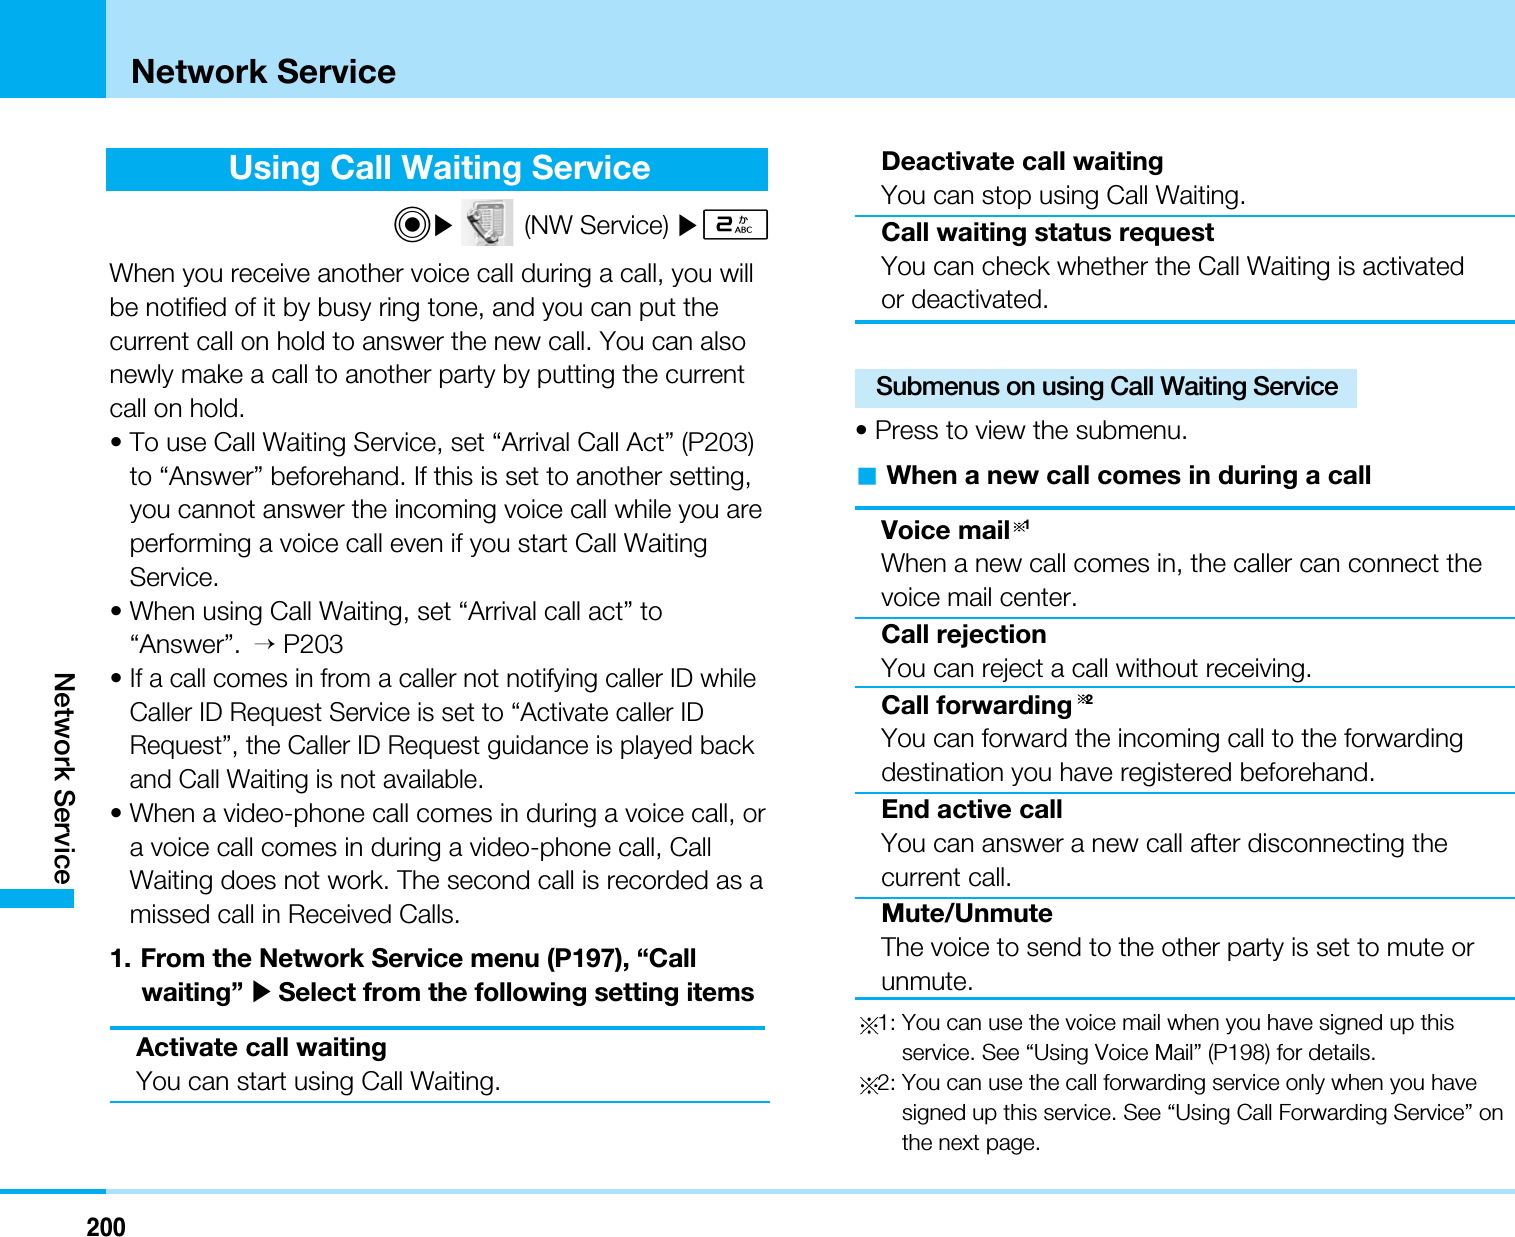 200Network ServiceNetwork ServiceUsing Call Waiting ServiceC](NW Service) ]2When you receive another voice call during a call, you willbe notified of it by busy ring tone, and you can put thecurrent call on hold to answer the new call. You can alsonewly make a call to another party by putting the currentcall on hold.• To use Call Waiting Service, set “Arrival Call Act” (P203)to “Answer” beforehand. If this is set to another setting,you cannot answer the incoming voice call while you areperforming a voice call even if you start Call WaitingService.• When using Call Waiting, set “Arrival call act” to“Answer”. &gt;P203•If a call comes in from a caller not notifying caller ID whileCaller ID Request Service is set to “Activate caller IDRequest”, the Caller ID Request guidance is played backand Call Waiting is not available.• When a video-phone call comes in during a voice call, ora voice call comes in during a video-phone call, CallWaiting does not work. The second call is recorded as amissed call in Received Calls.1. From the Network Service menu (P197), “Callwaiting” ]Select from the following setting itemsActivate call waitingYou can start using Call Waiting.Deactivate call waitingYou can stop using Call Waiting.Call waiting status requestYou can check whether the Call Waiting is activatedor deactivated.Submenus on using Call Waiting Service• Press to view the submenu.aWhen a new call comes in during a callVoice mail 1When a new call comes in, the caller can connect thevoice mail center.Call rejectionYou can reject a call without receiving.Call forwarding 2You can forward the incoming call to the forwardingdestination you have registered beforehand.End active callYou can answer a new call after disconnecting thecurrent call.Mute/UnmuteThe voice to send to the other party is set to mute orunmute.1: You can use the voice mail when you have signed up thisservice. See “Using Voice Mail” (P198) for details.2: You can use the call forwarding service only when you havesigned up this service. See “Using Call Forwarding Service” onthe next page.